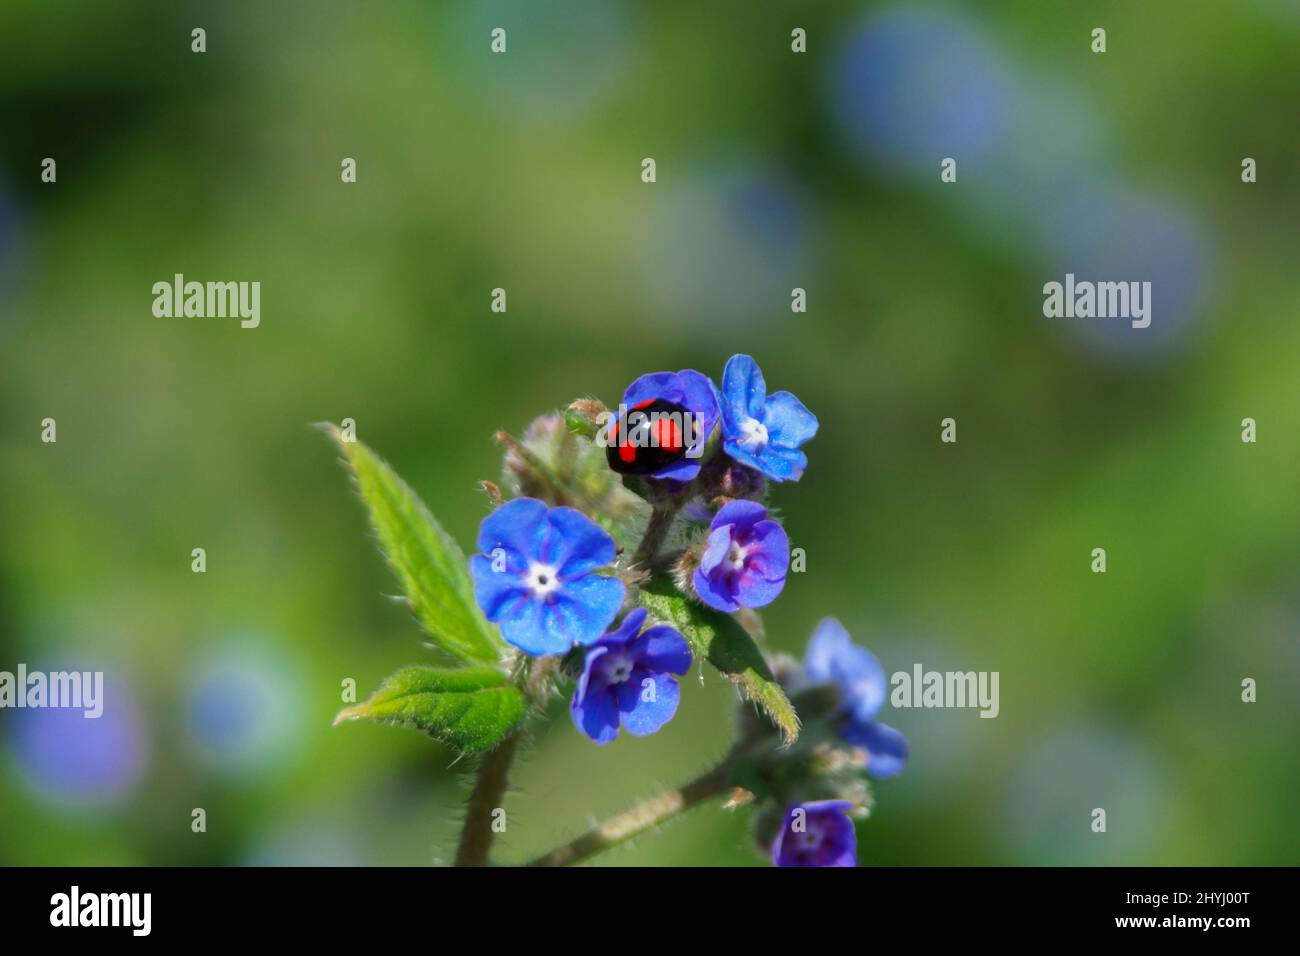 Shallow focus shot of an ladybug standing on alkanet flowering plant in bright sunlight Stock Photo